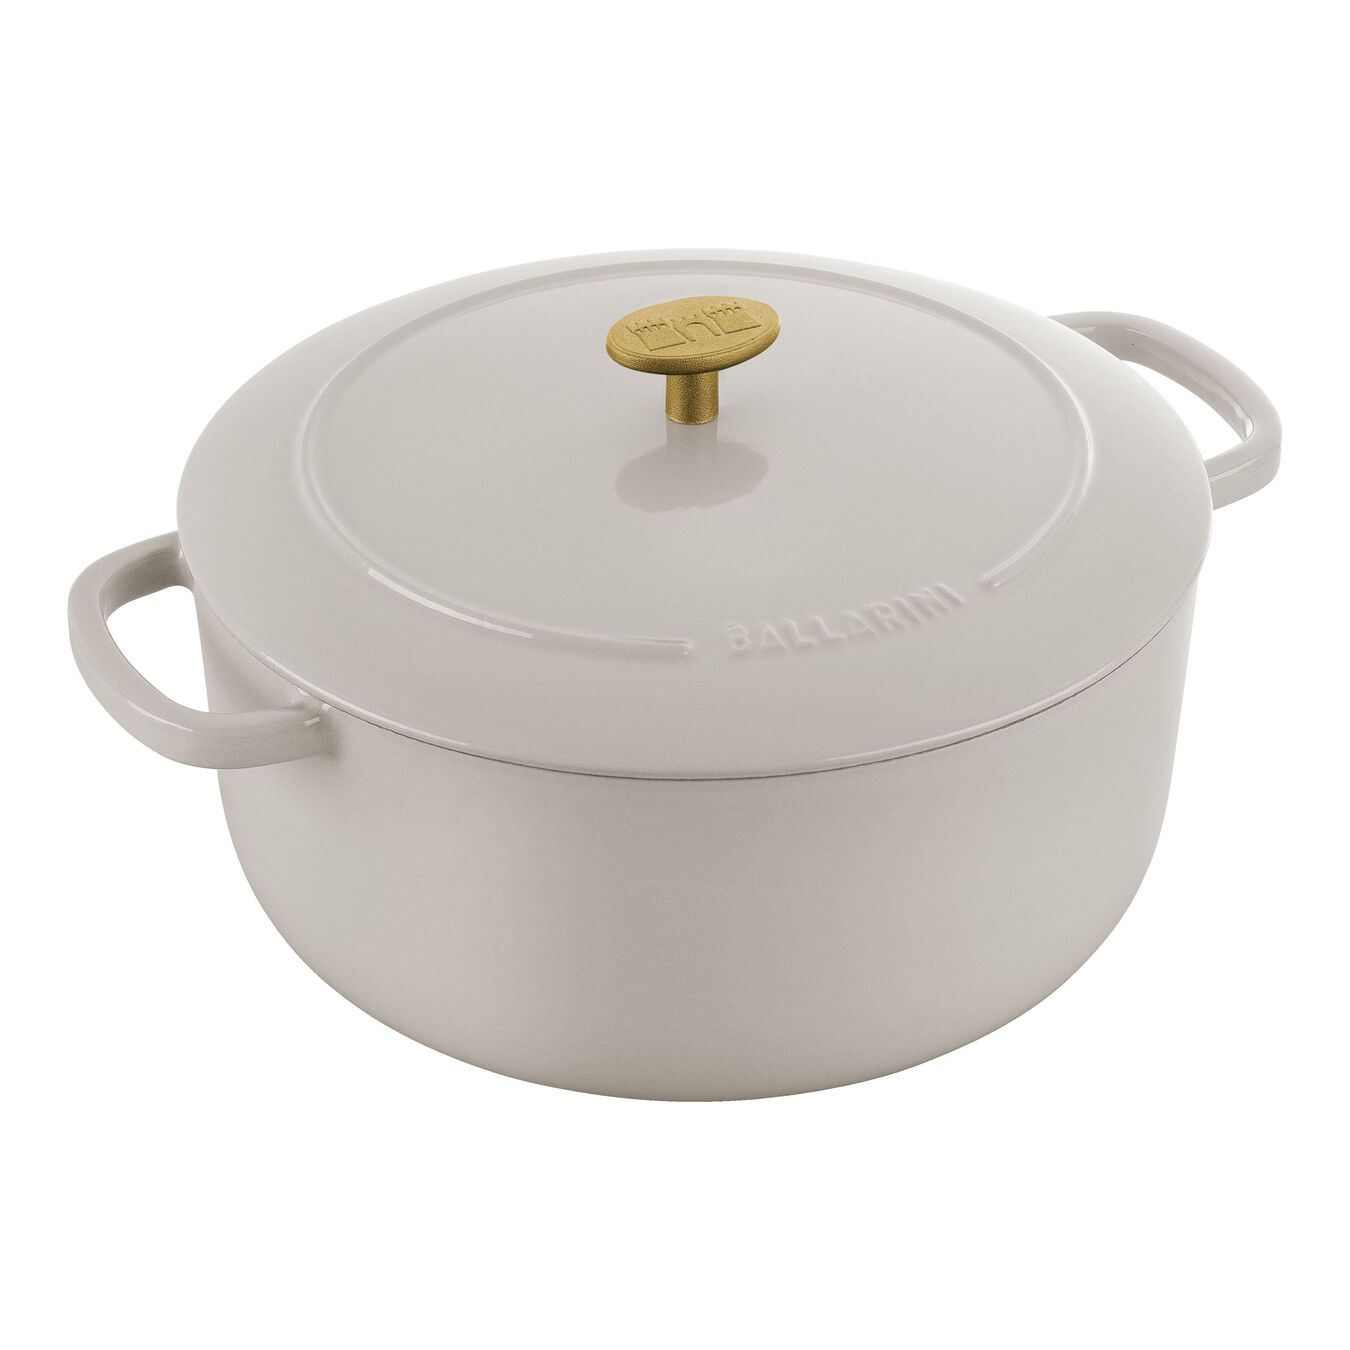 the ivory bellamonte 5.75 quart cocotte on a white background